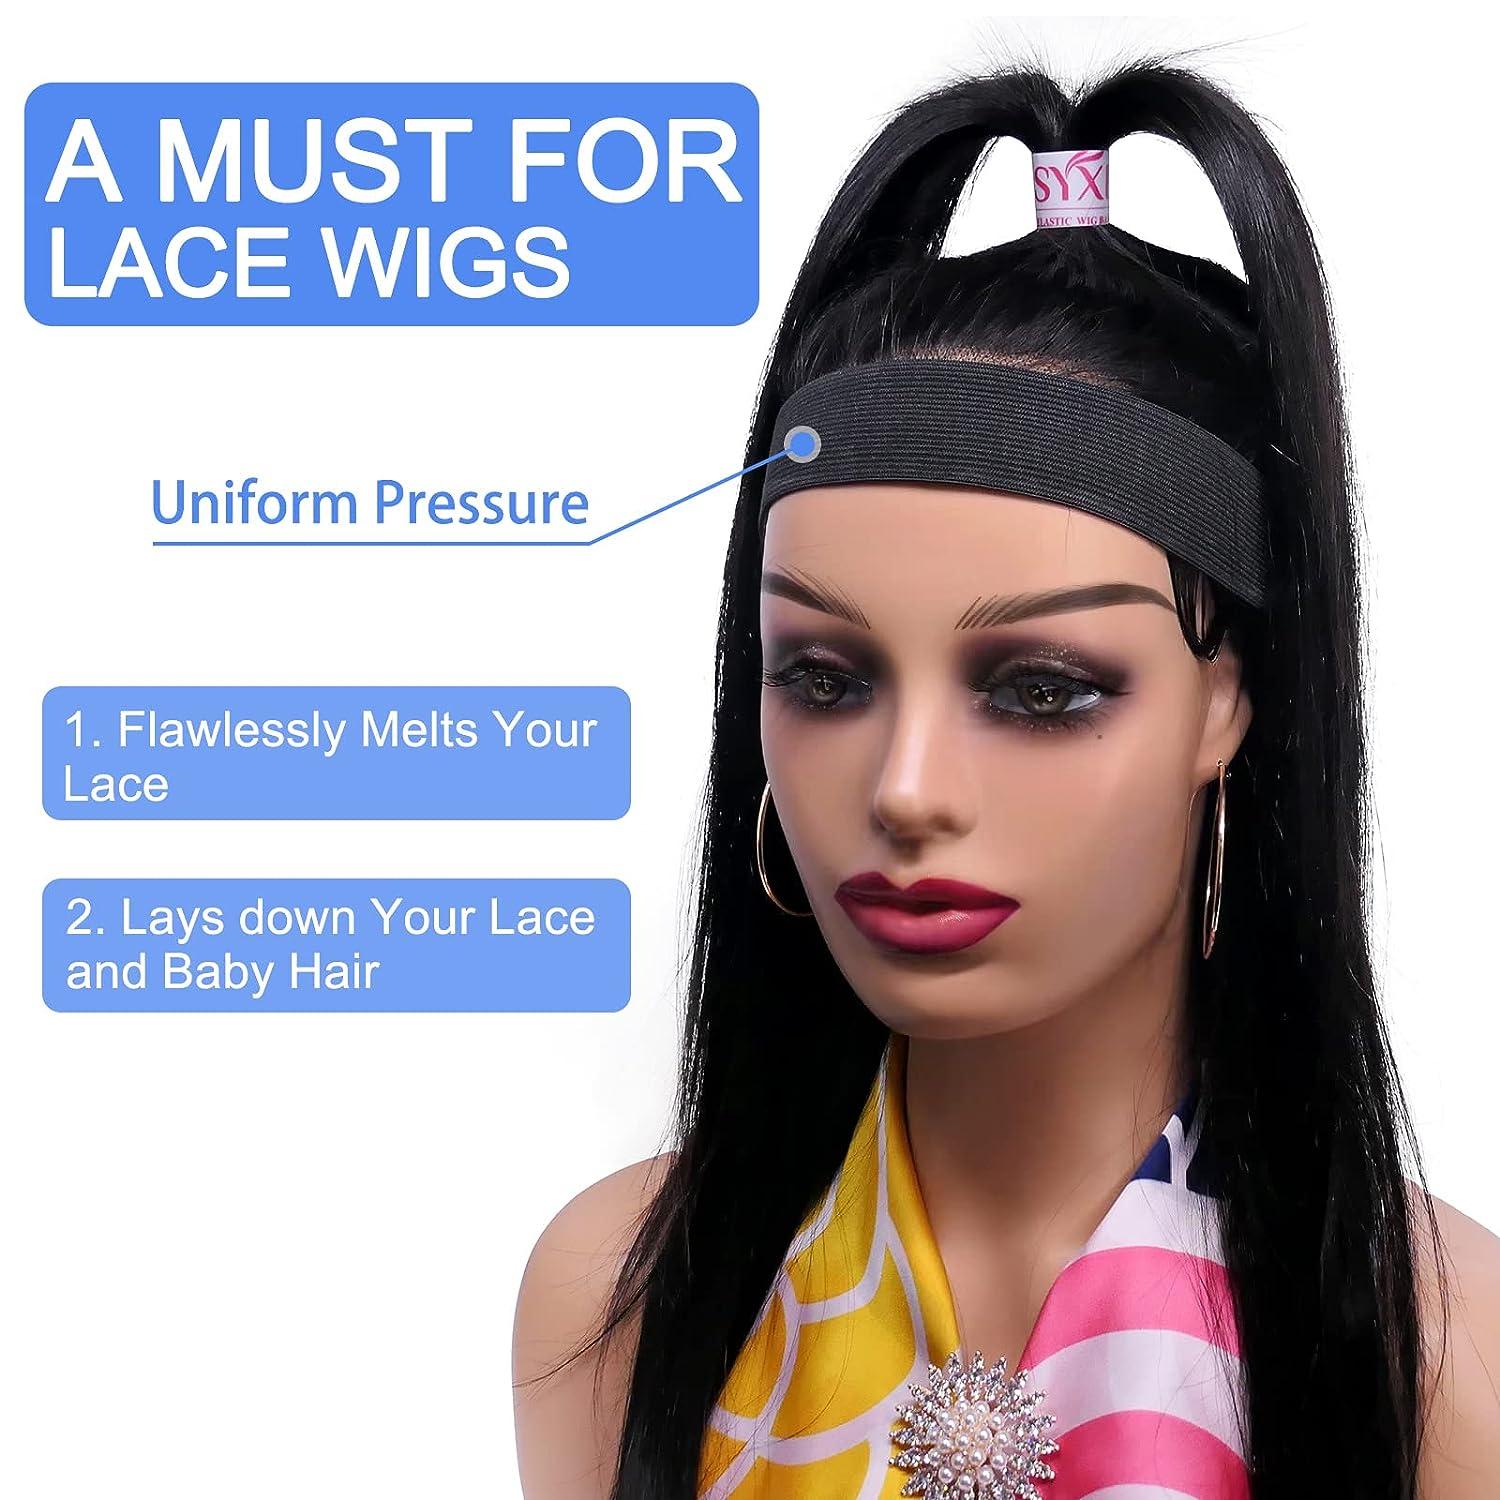 Elastic Bands for Wig Bands for Keeping Wigs in Place - Head Band Wig Grip  Band for Lace Front Edge Saver Wig Band for Melting Lace Wig Accessories  Lace Melting Band: Buy